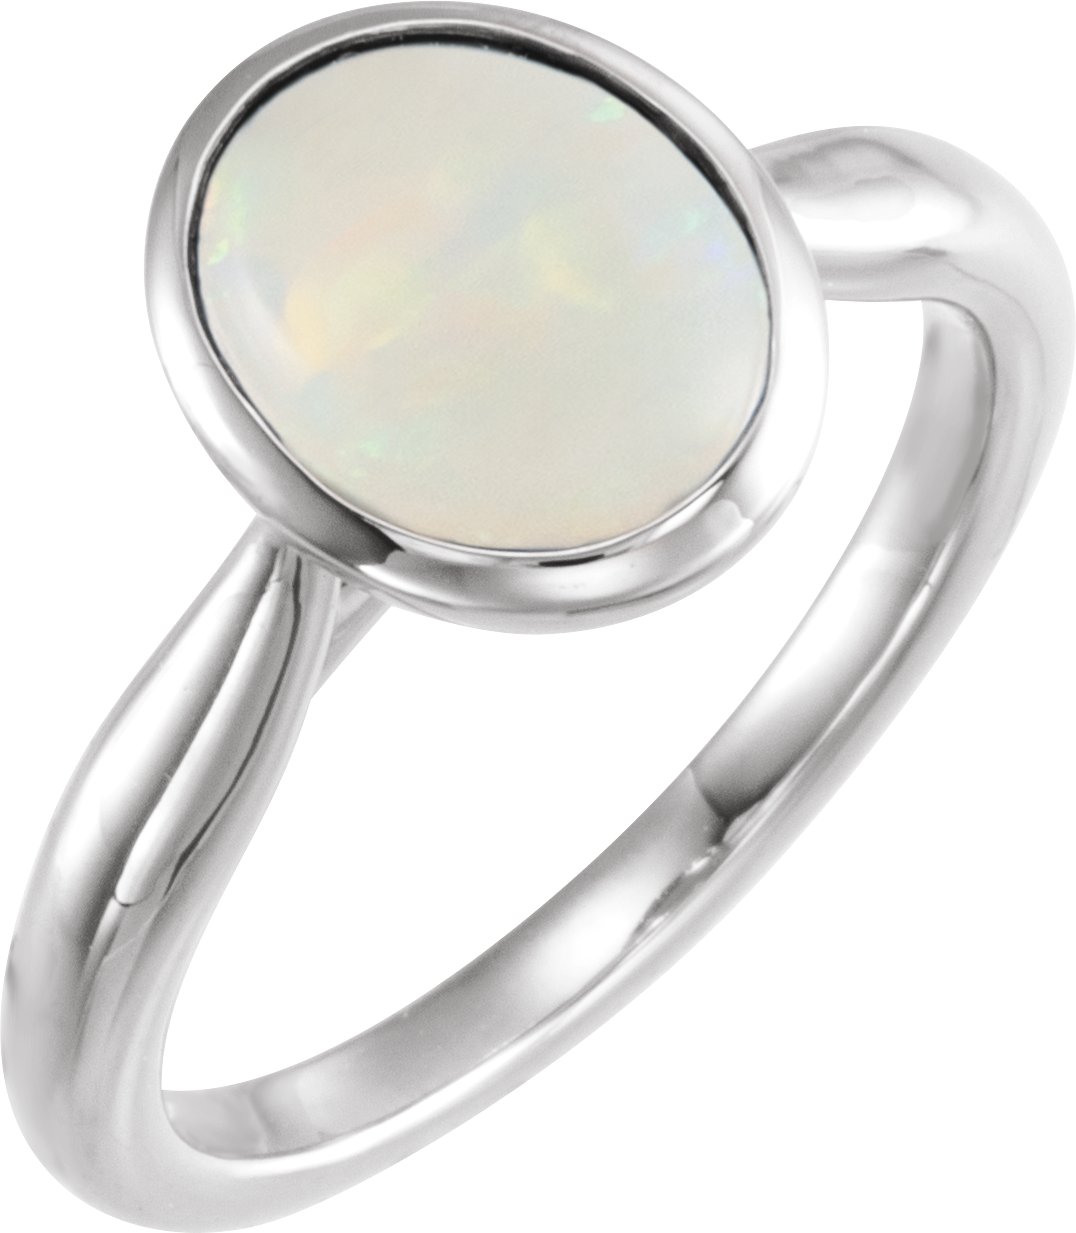 Sterling Silver 10x8 mm Natural White Ethiopian Opal Cabochon Ring